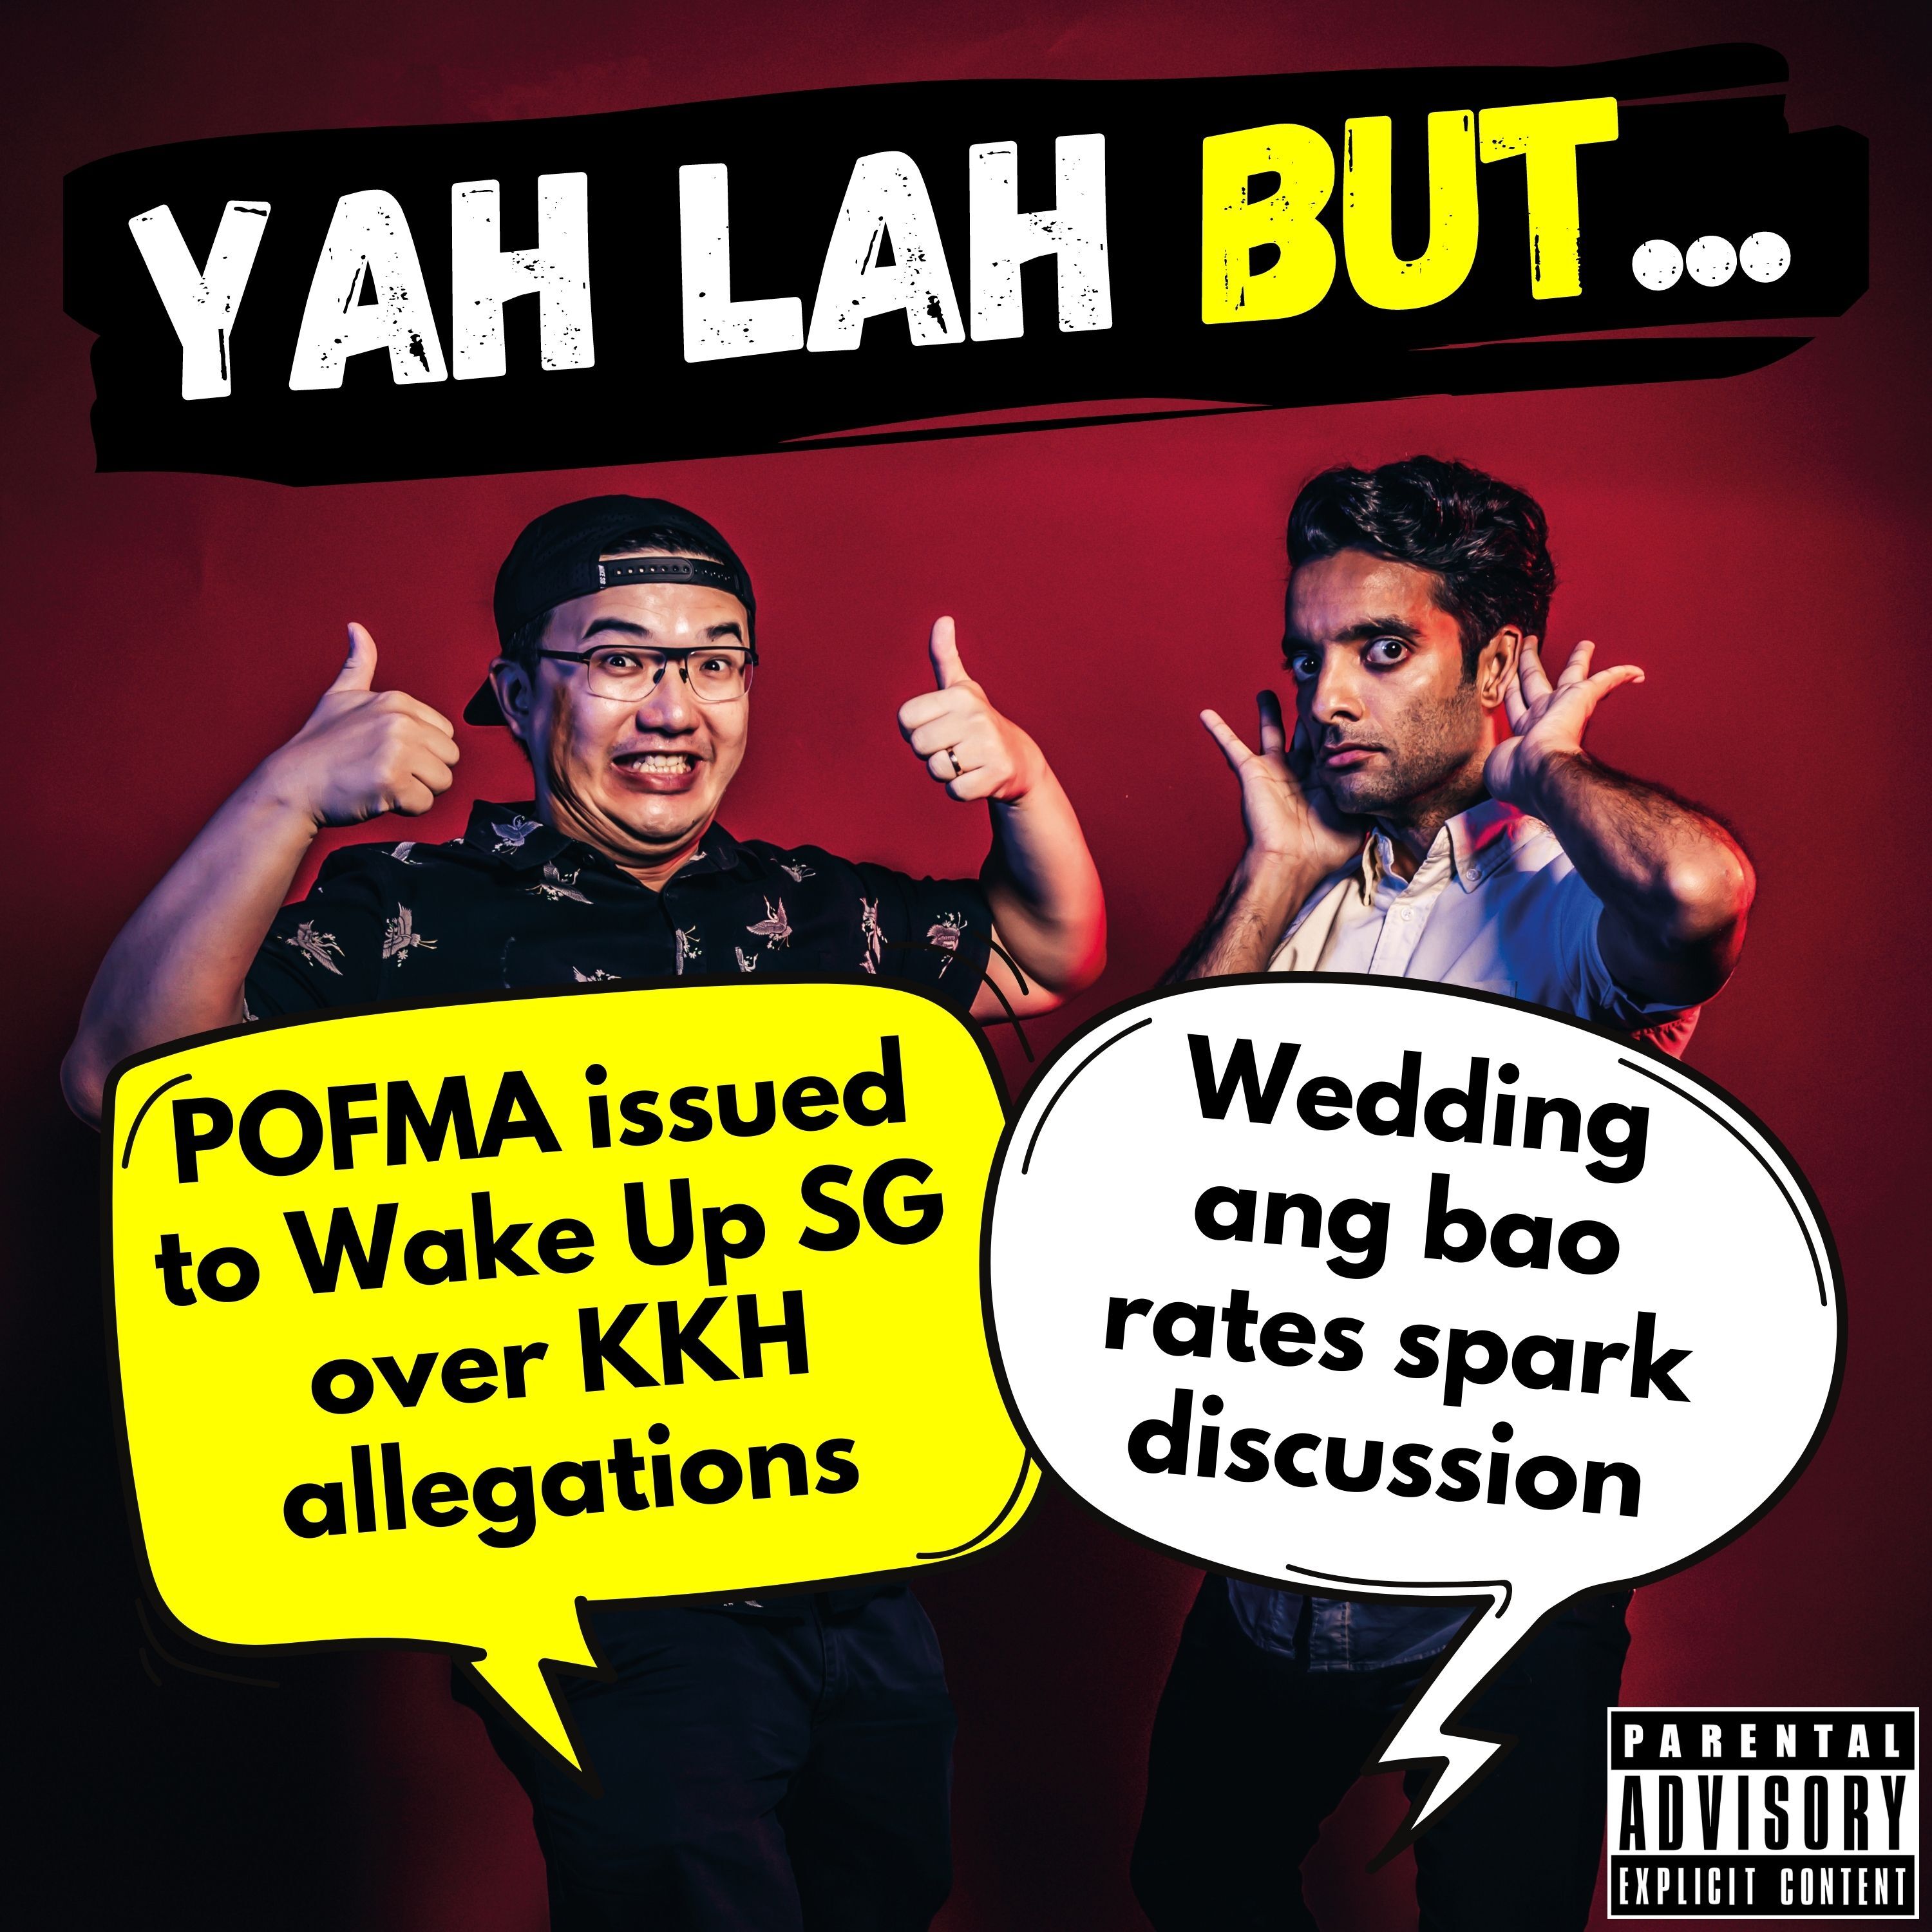 #278 - POFMA issued to Wake Up SG over KKH allegations & wedding ang bao rates spark discussion